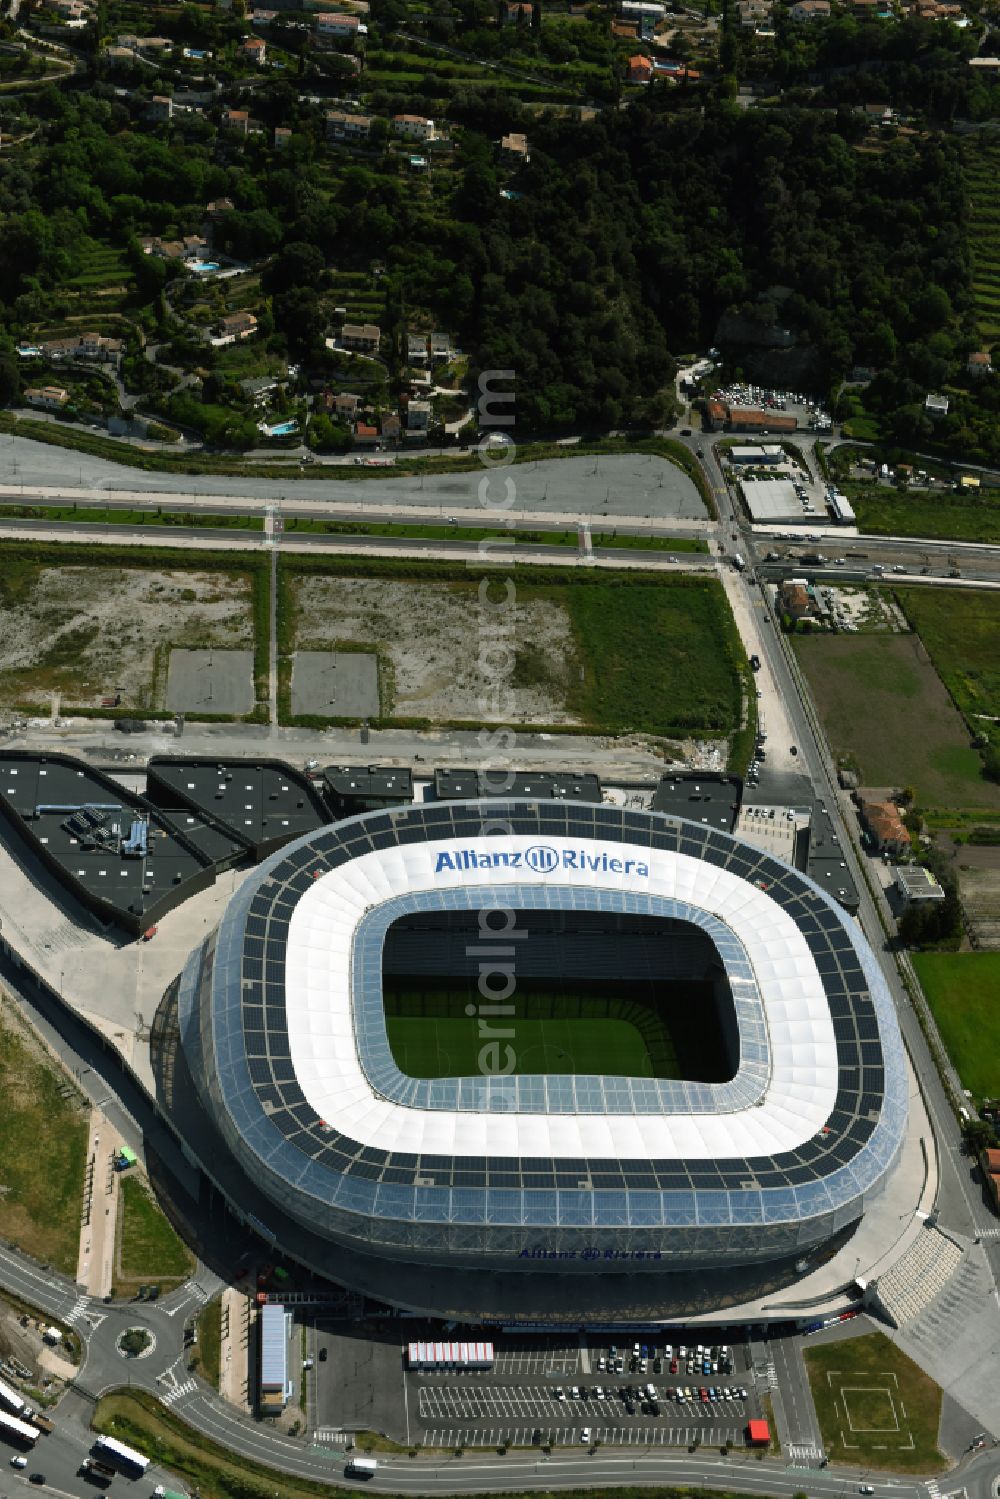 Nizza from the bird's eye view: Sports facility grounds of the Arena stadium Allianz Riviera Bd. des Jardiniers in Nice in Provence-Alpes-Cote d'Azur, France